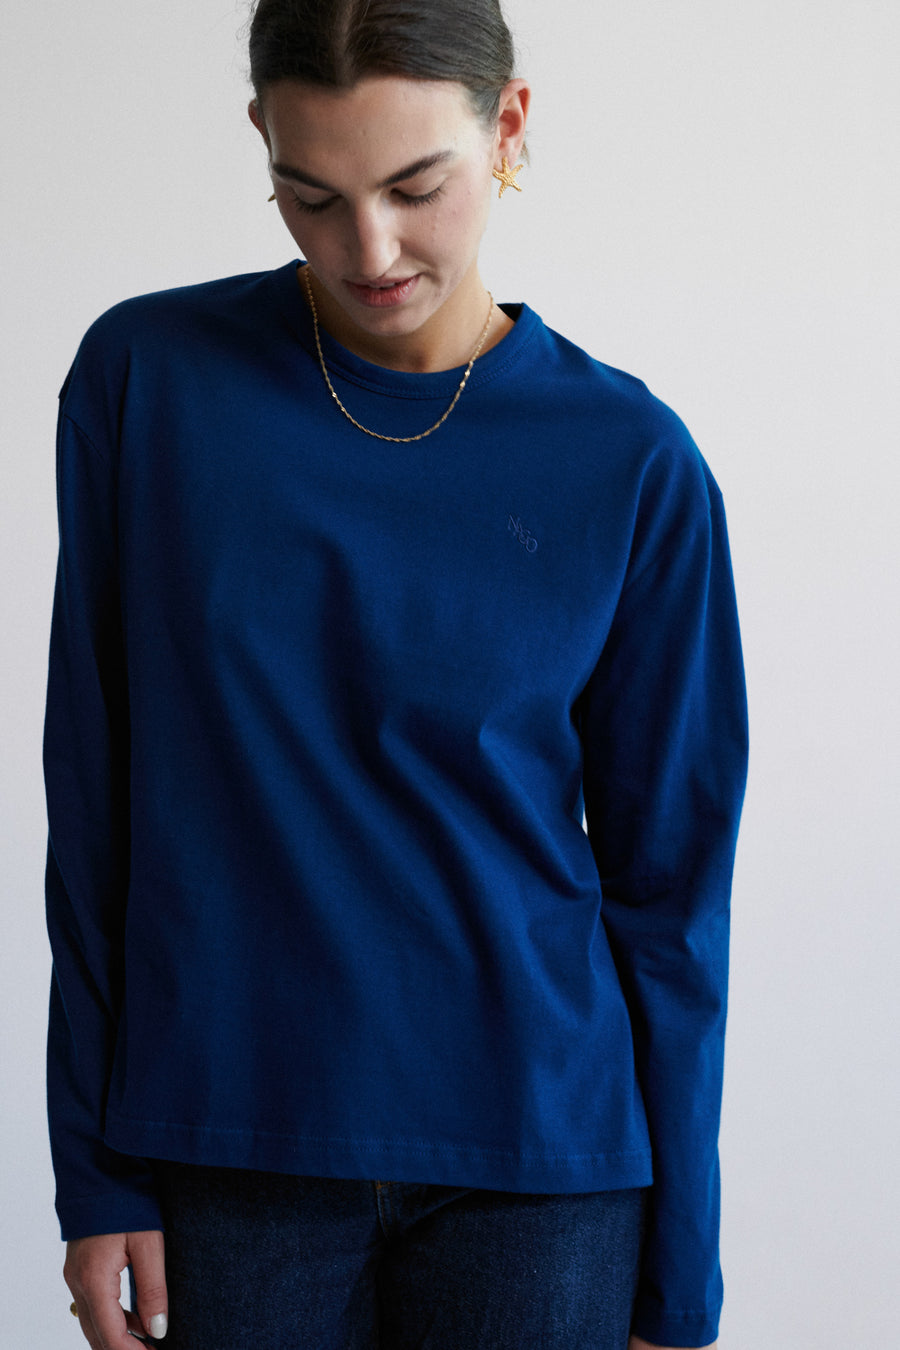 Longsleeve in cotton / 14 / 20 / cobalt blue  ?The model is 178 cm tall and wears size XS/S?